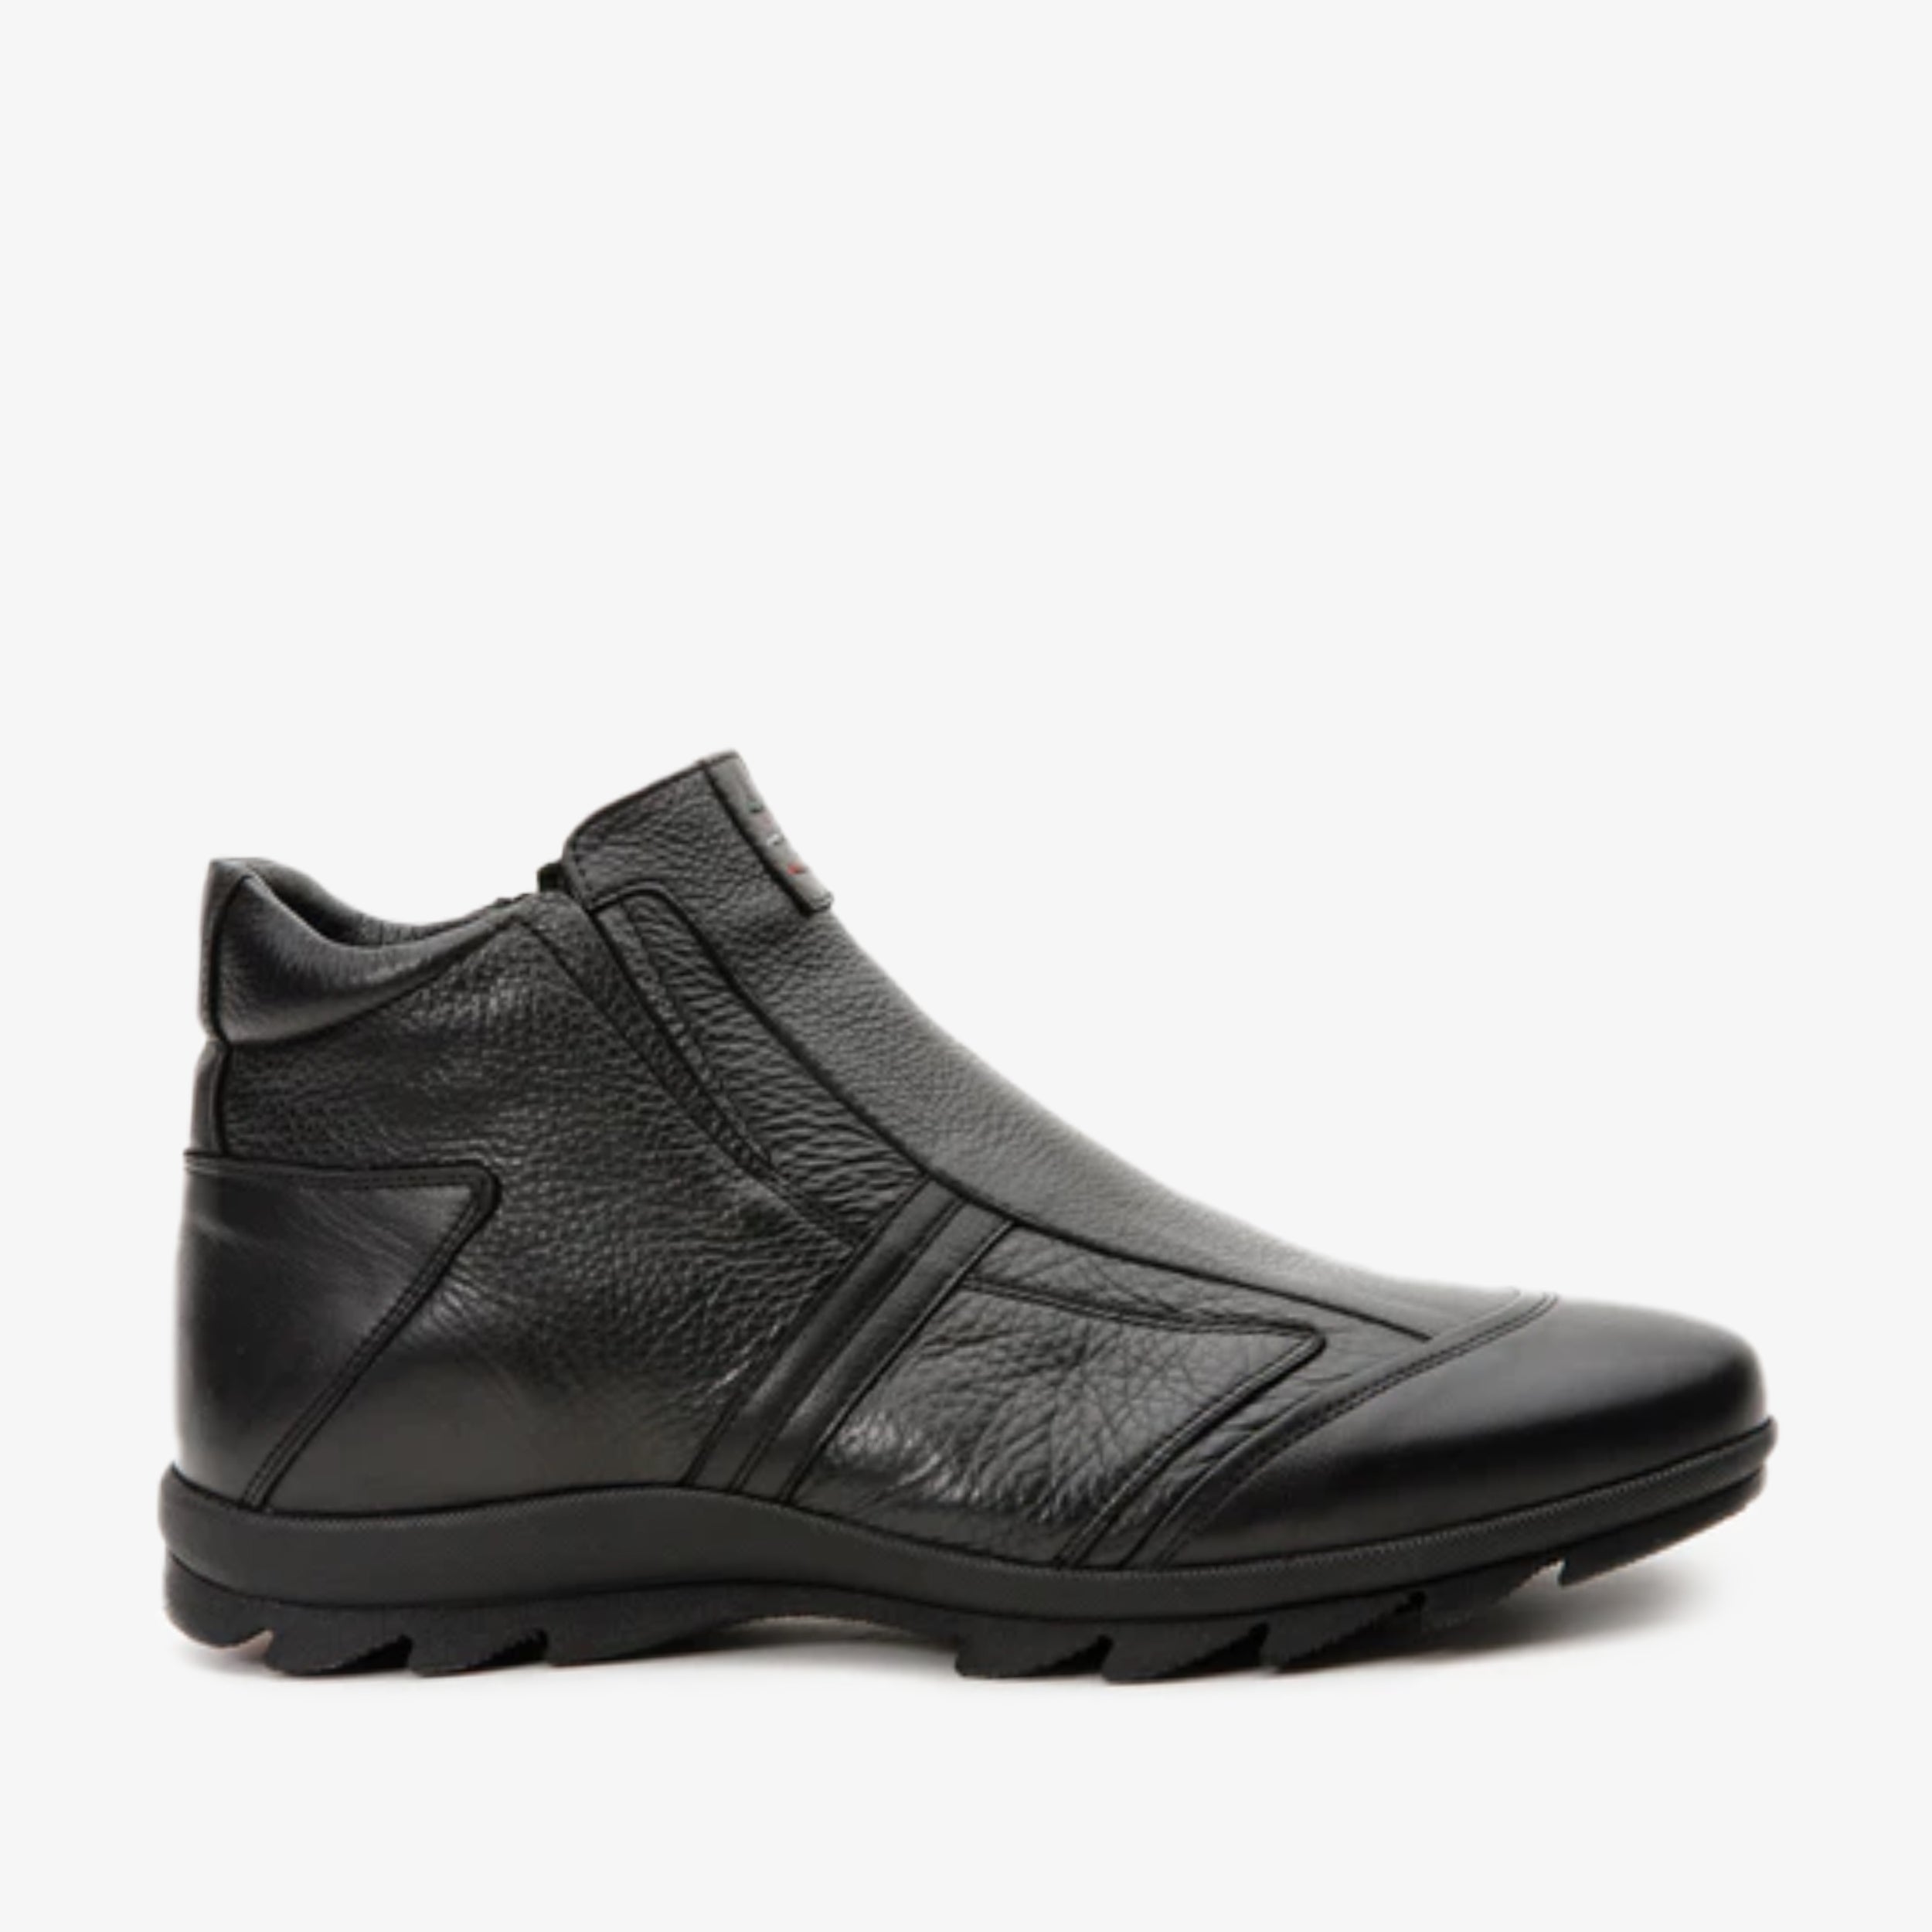 The Montreal Black Leather Casual Zip-Up Ankle Men Boot